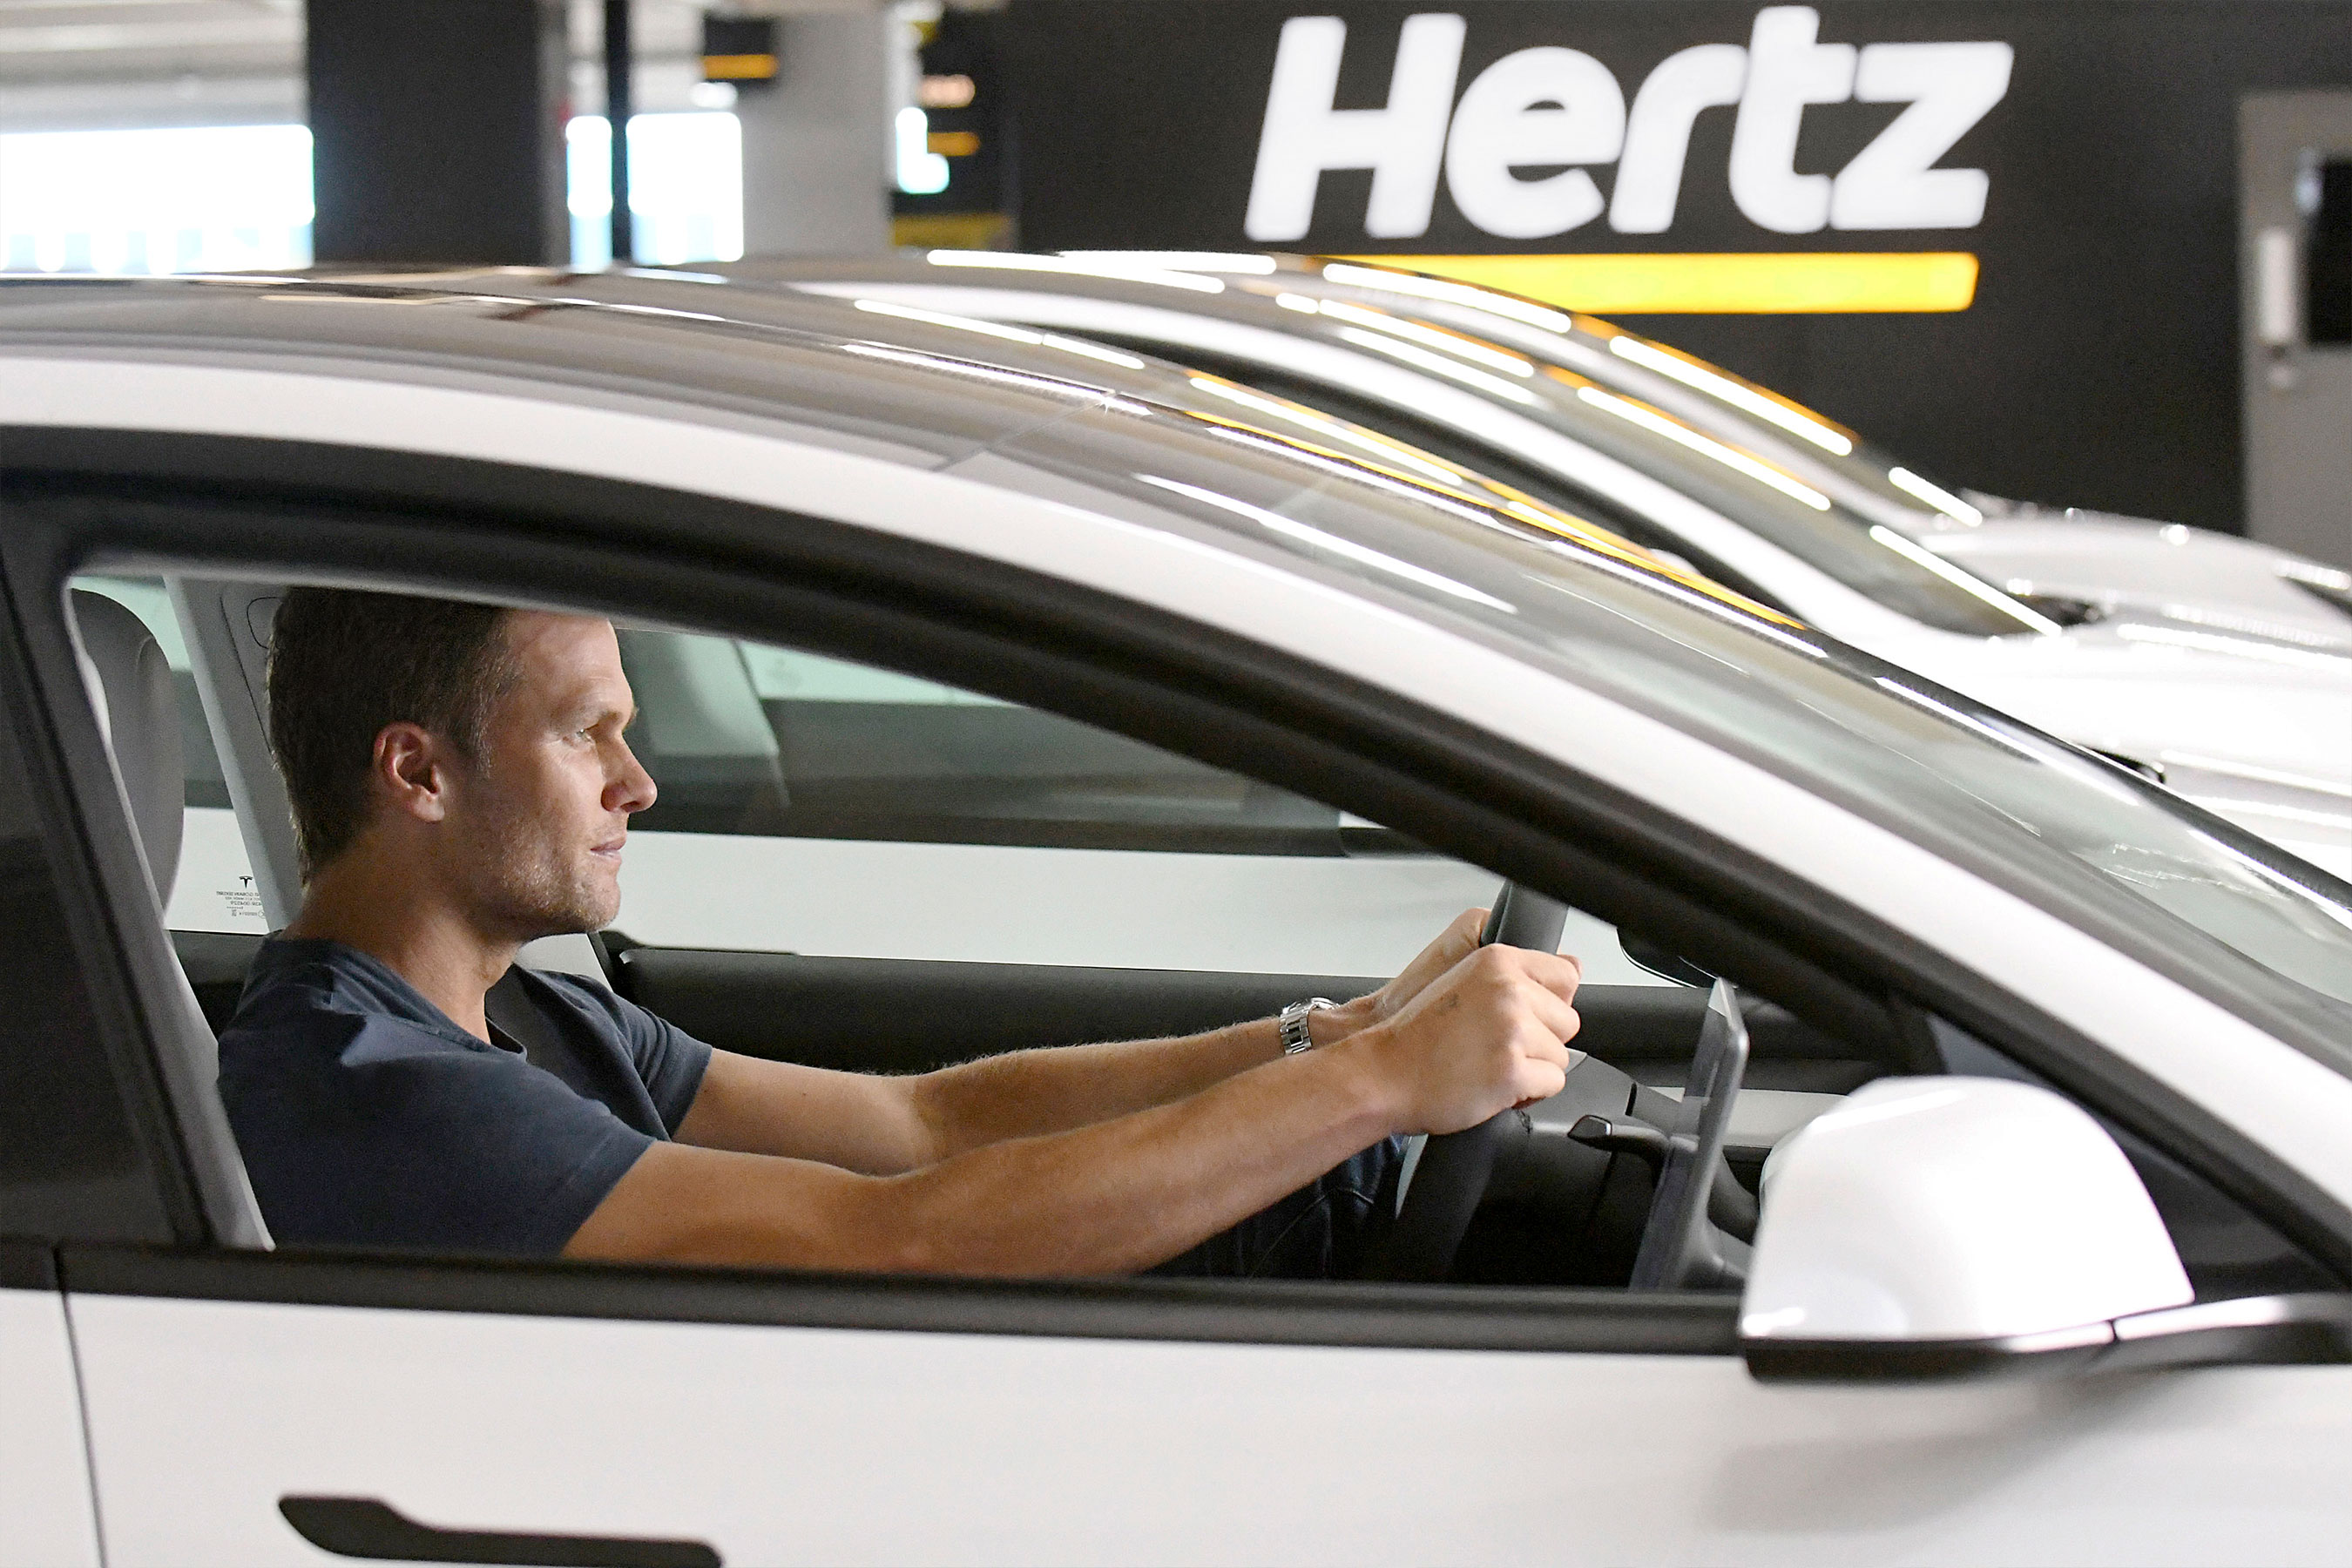 On set at Hertz's "Speed" commercial, which uses humor and Tom Brady's 